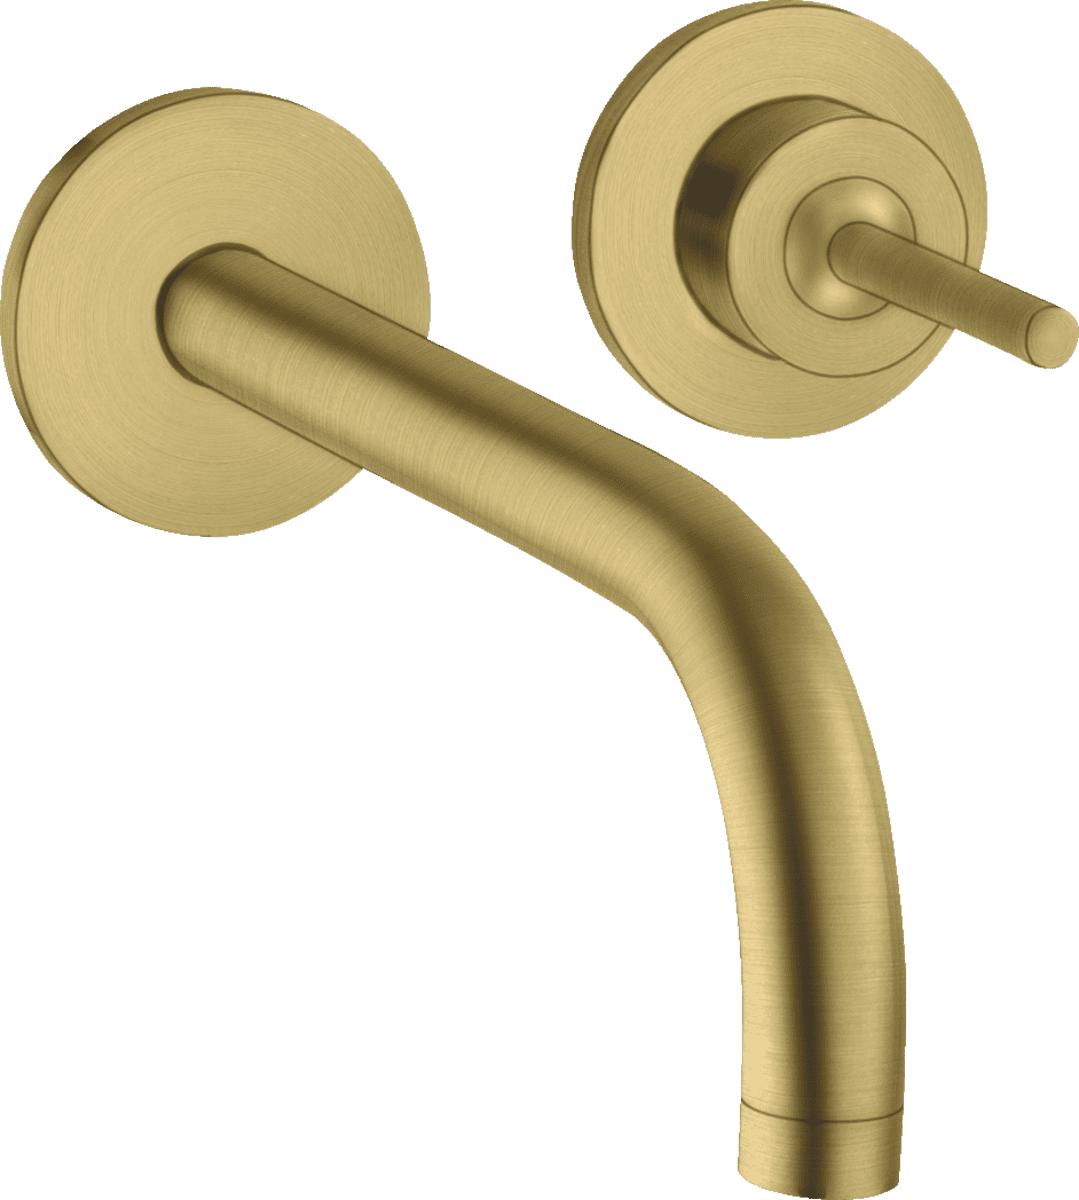 HANSGROHE AXOR Uno Single lever basin mixer for concealed installation wall-mounted with spout 225 mm and escutcheons #38116950 - Brushed Brass resmi